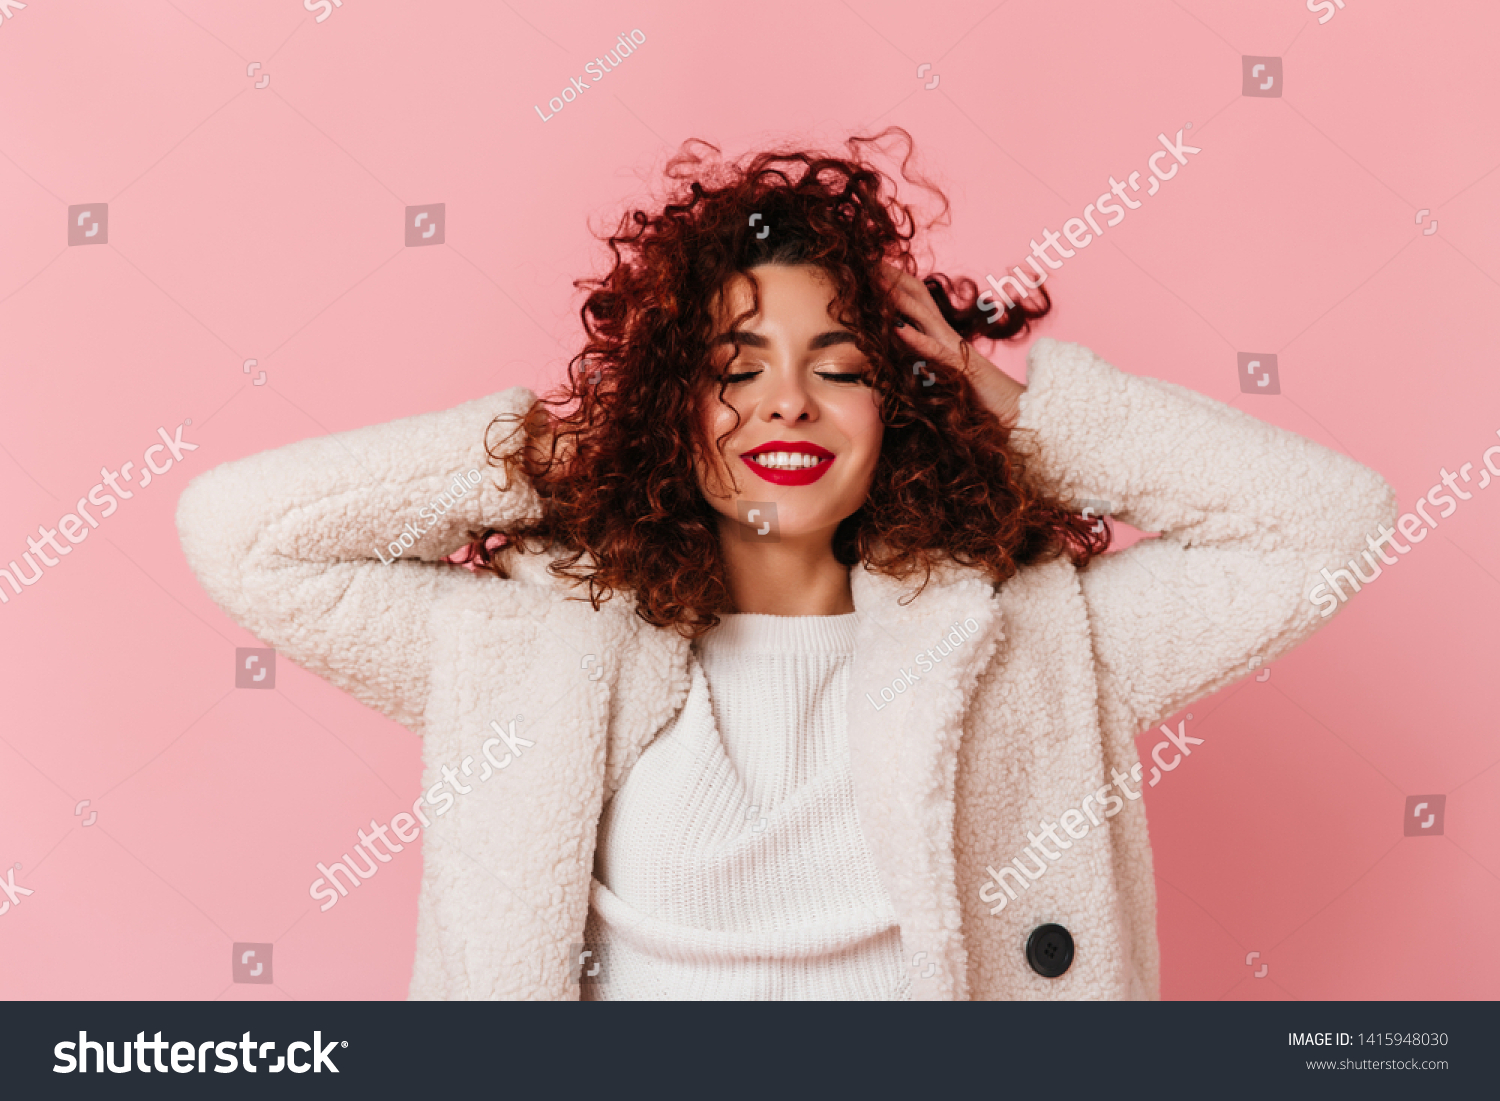 Portrait of charming lady with red lipstick and snow-white smile dressed in bright eco-coat and touching her curly hair on pink background #1415948030